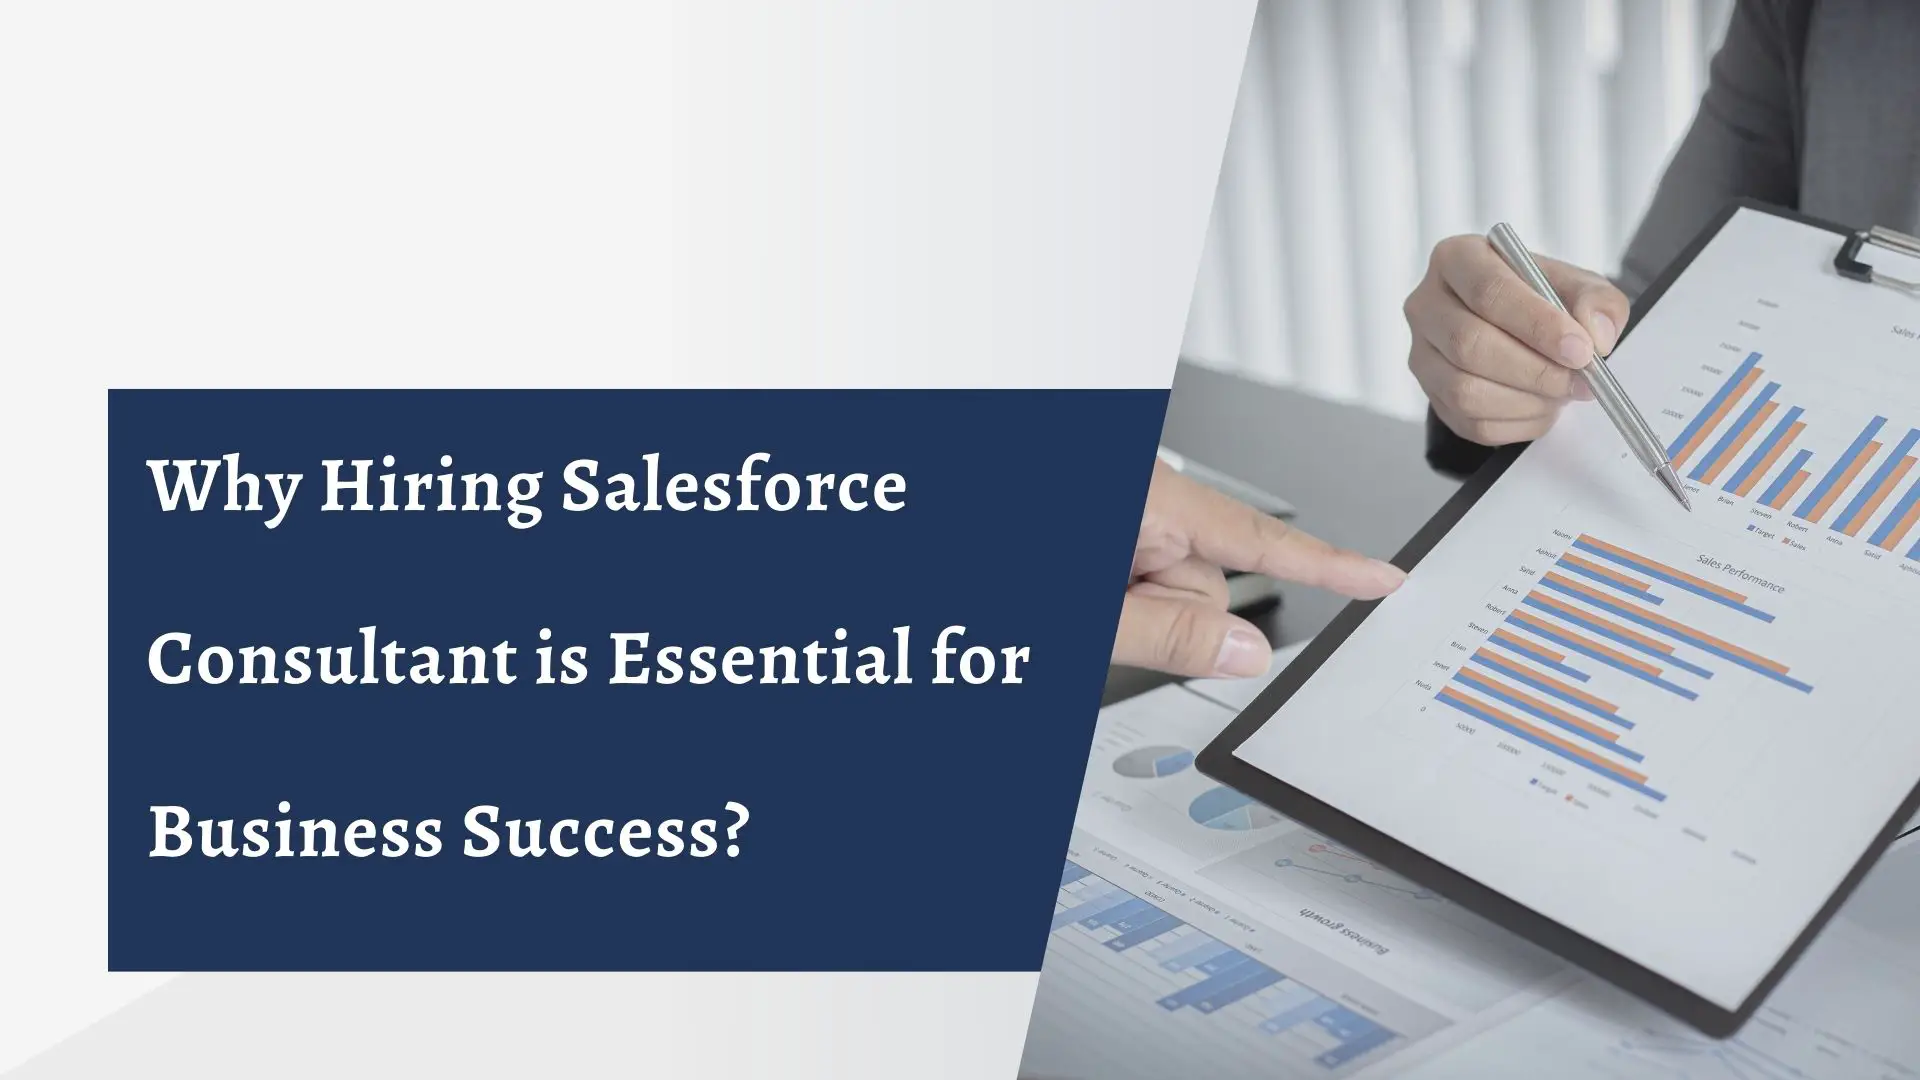 Why Hiring Salesforce Consultant is Essential for Business Success?